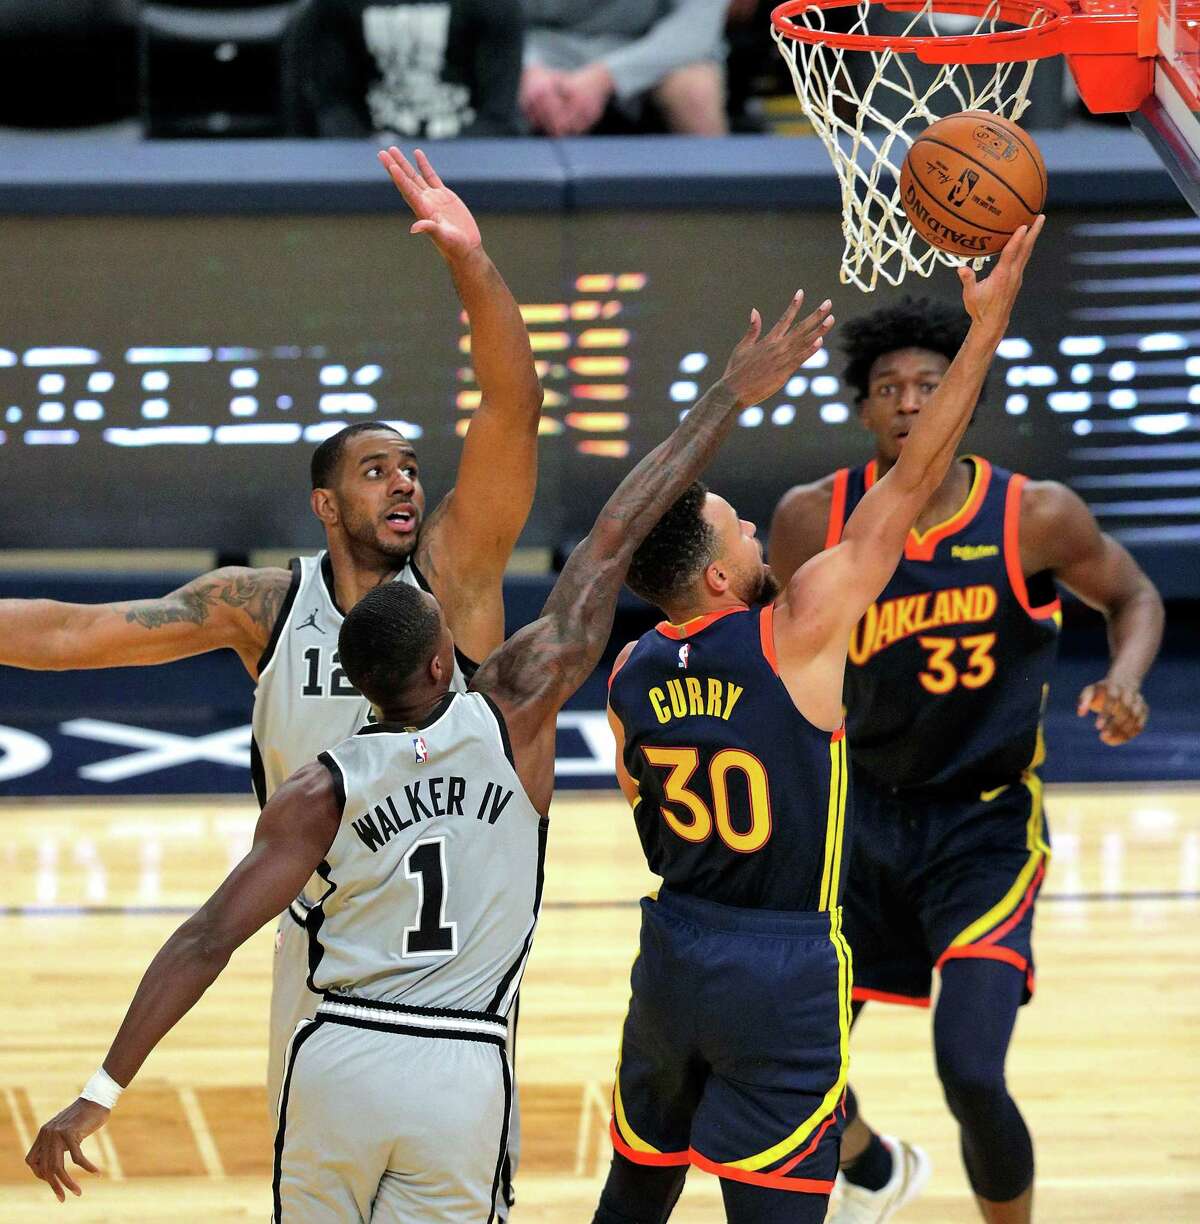 Stephen Curry (30) scores despite the double coverage in the first half as the Golden State Warriors played the San Antonio Spurs at Chase Center in San Francisco, Calif., on Wednesday, January 20, 2021.